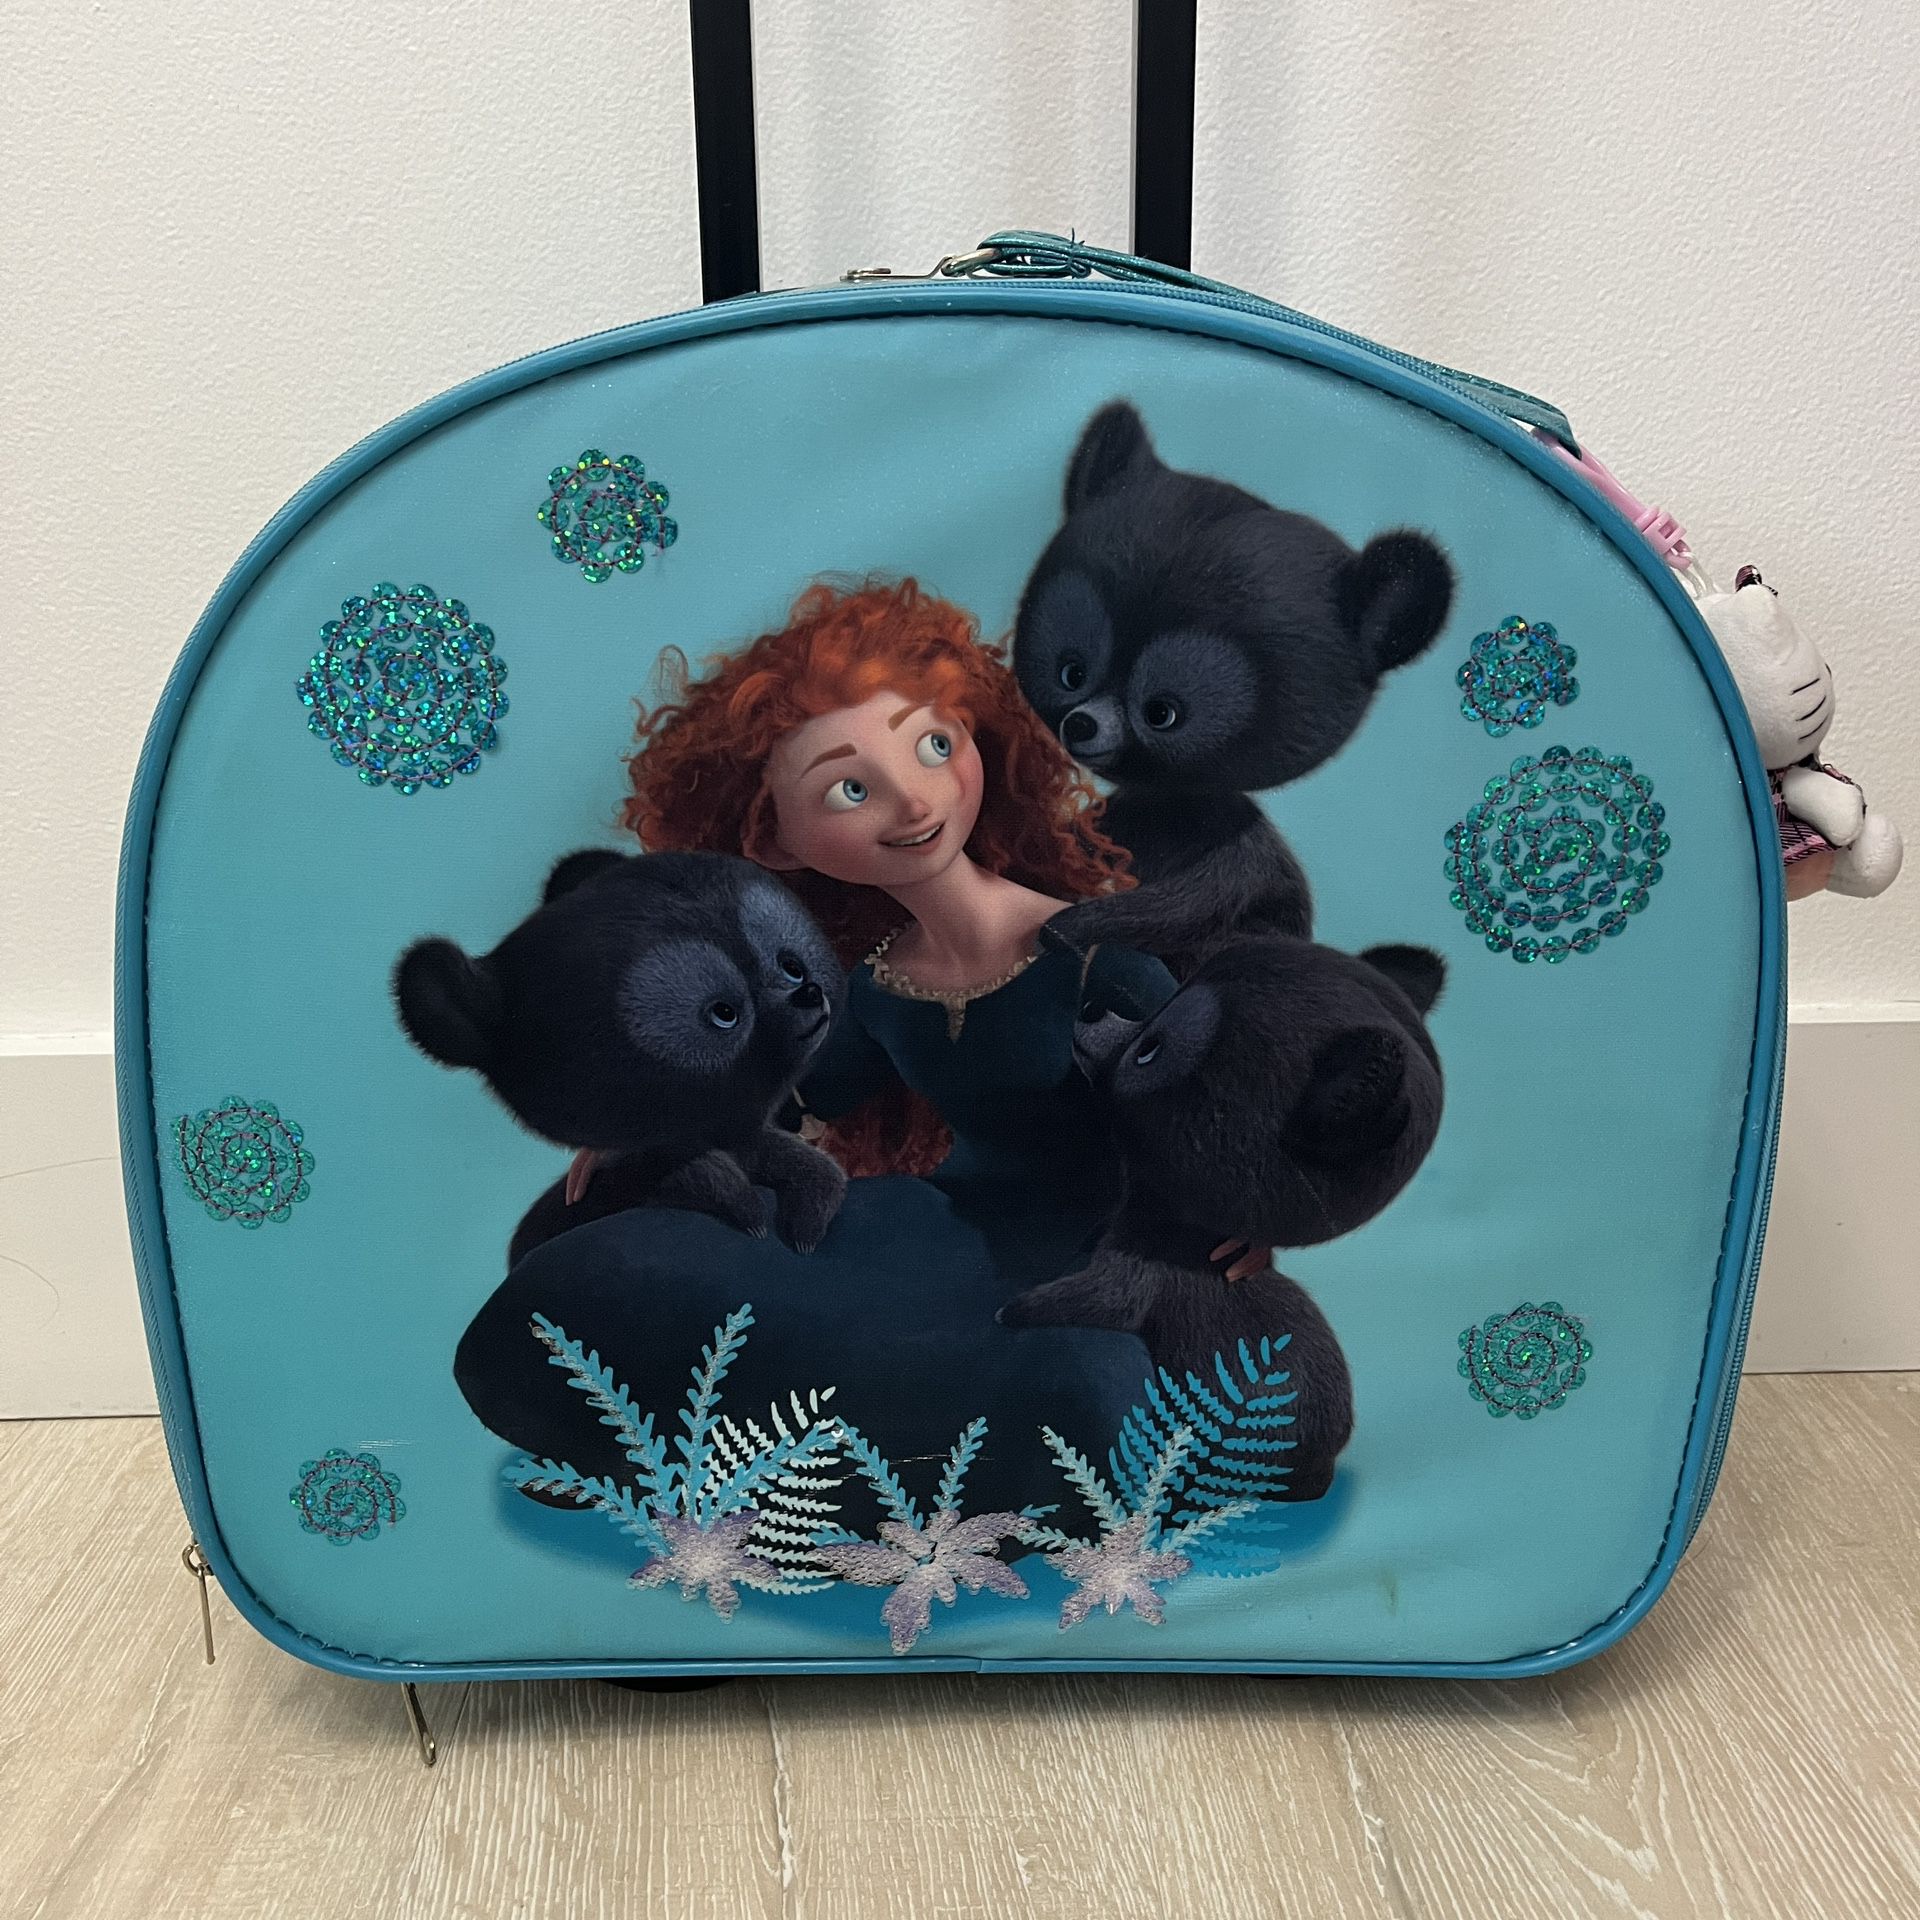 Disney Brave Merida Suitcase with Extending Handle Rolling Luggage